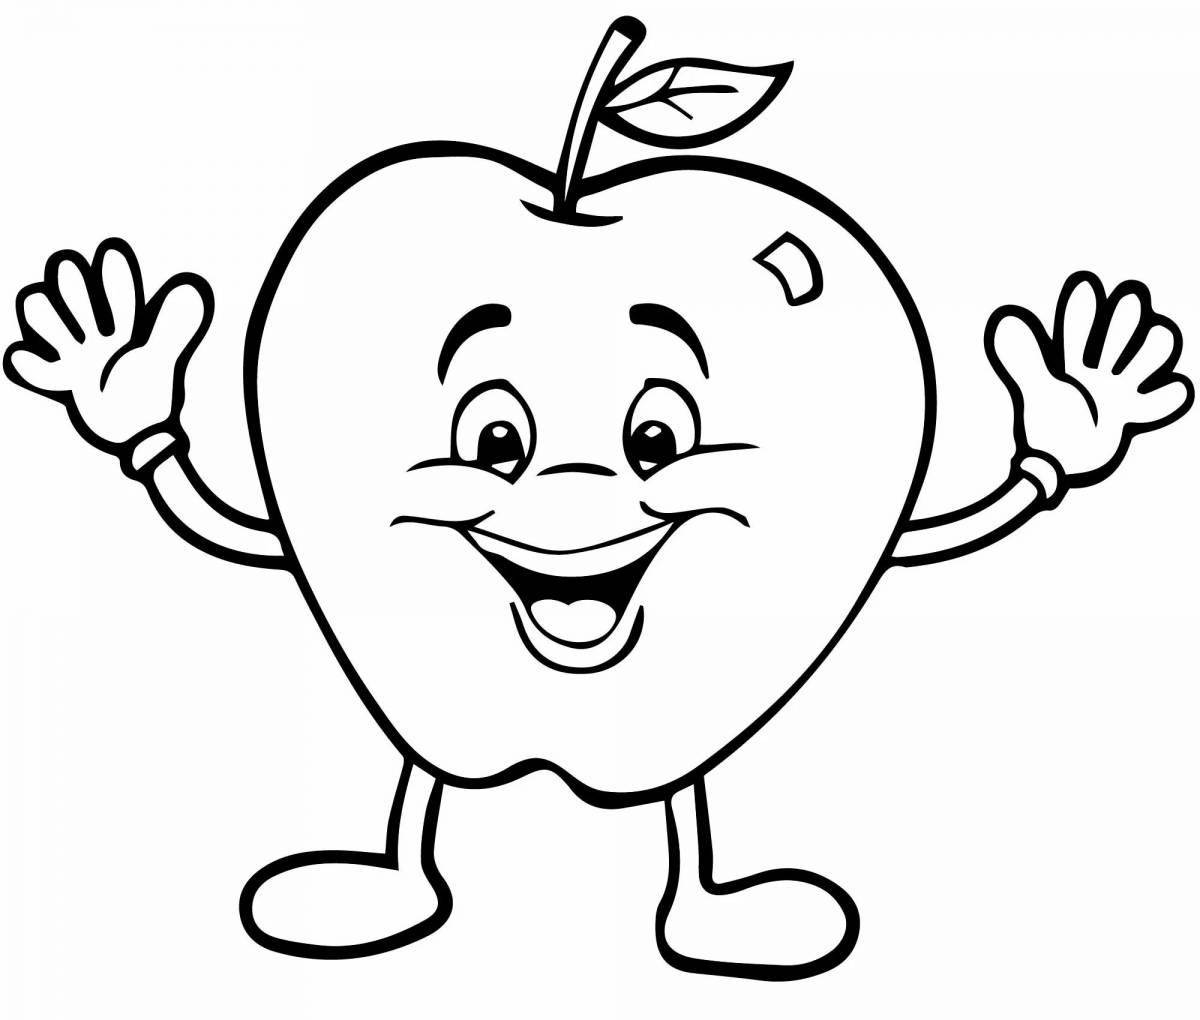 Apple drawing for kids #16